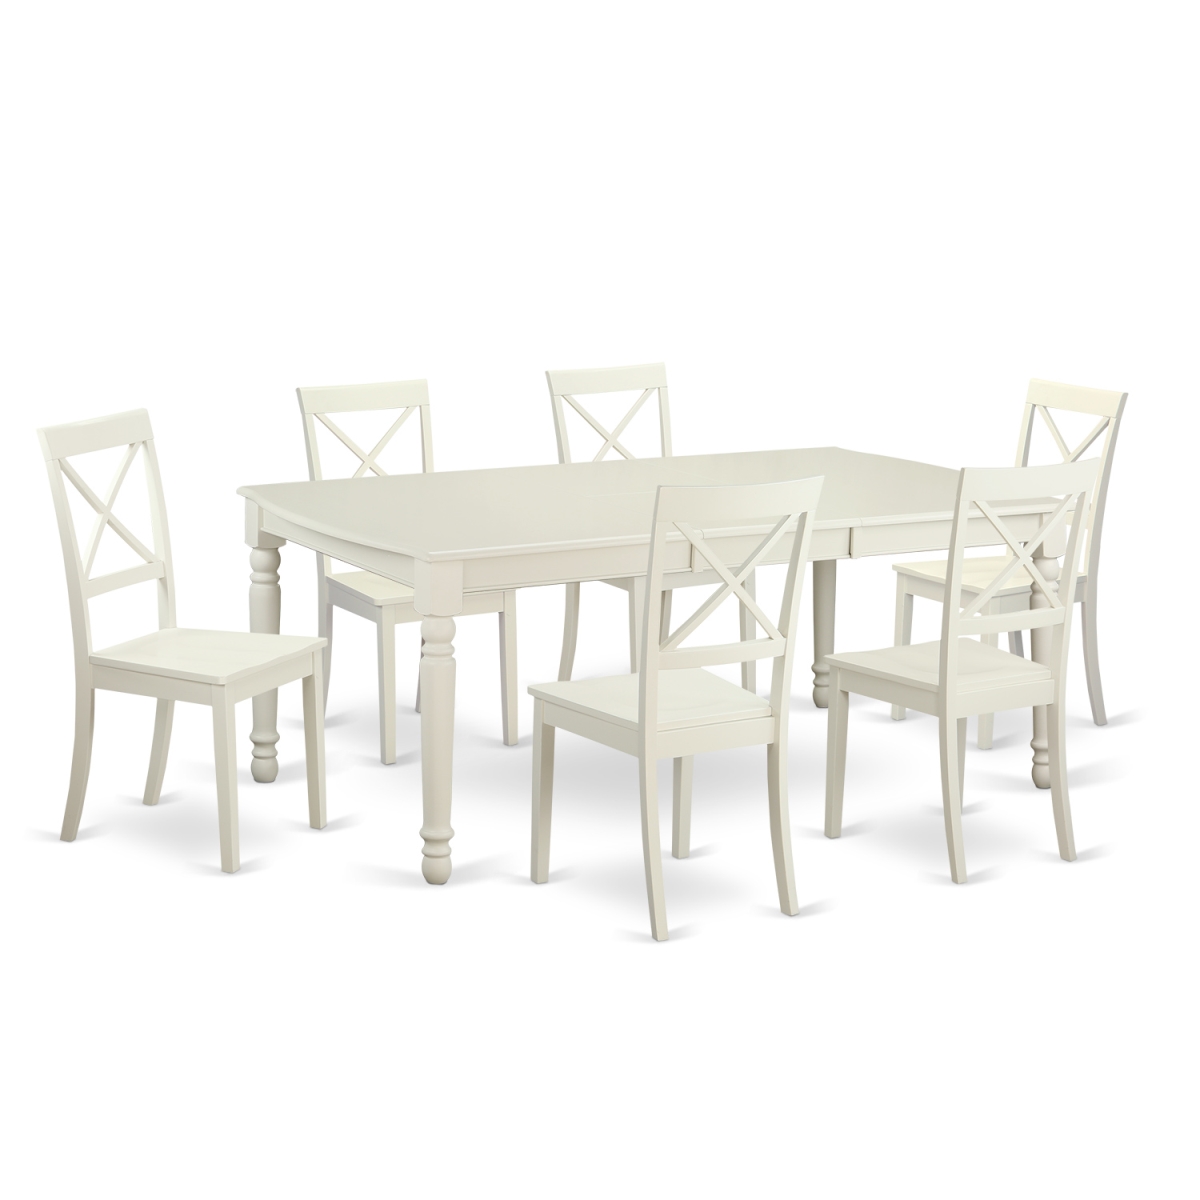 Picture of East West Furniture DOBO7-LWH-W Dining Room Set with 6 Table & 6 Chairs, Linen White - 7 Piece